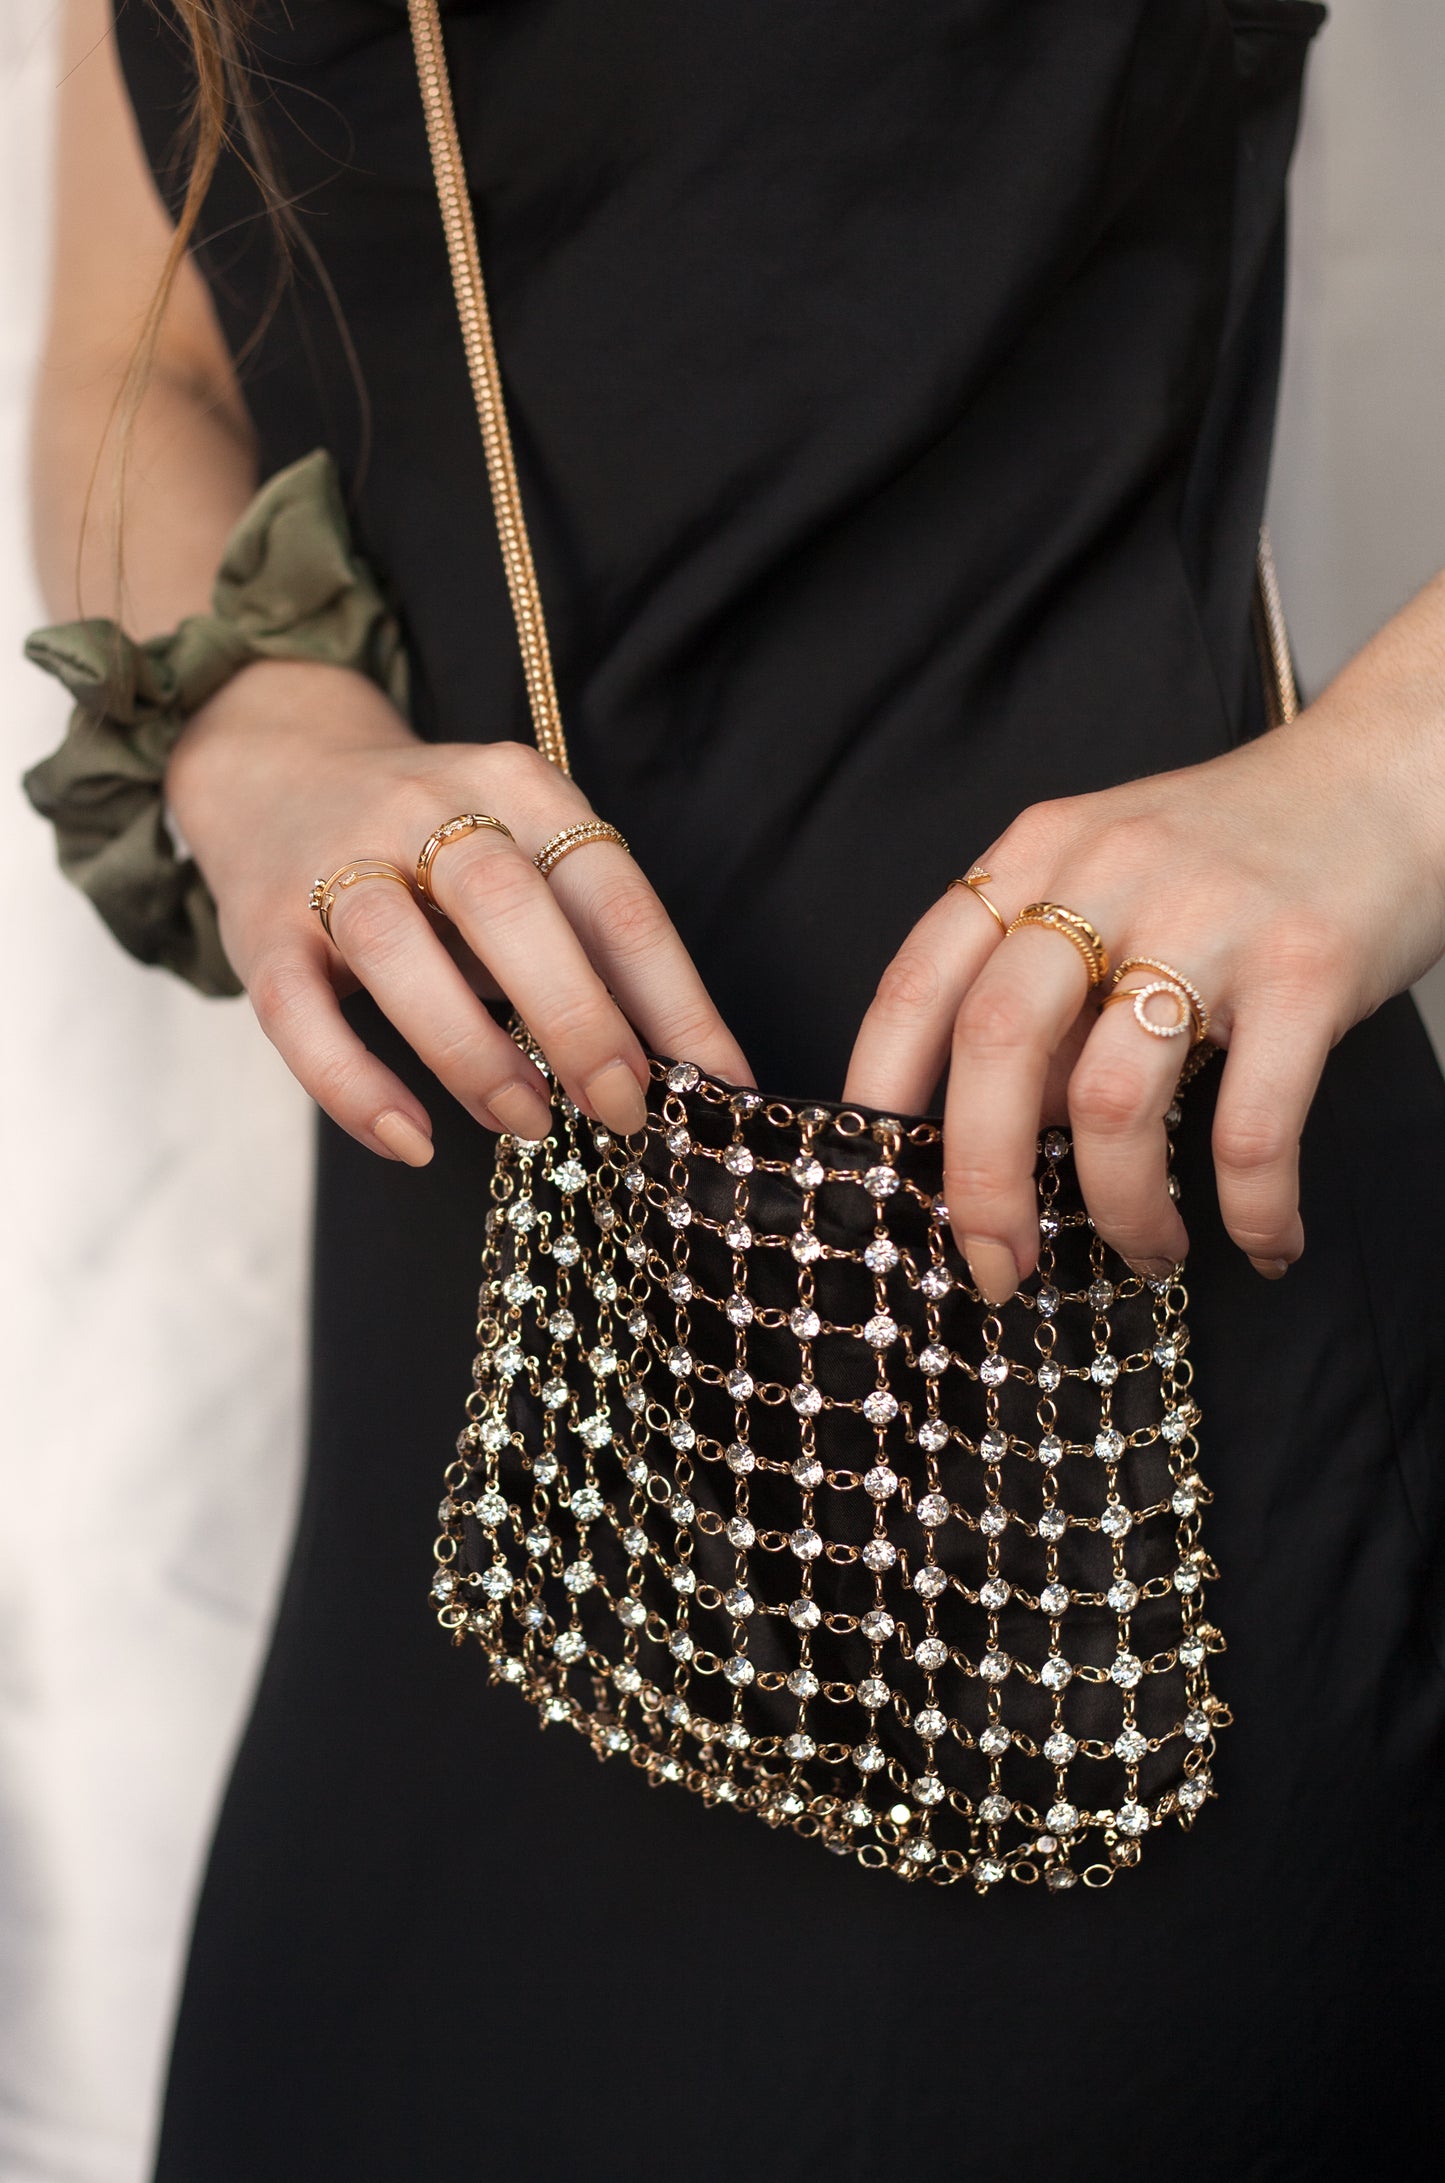 Crystal Criss Cross Chain Bag in Black & Gold shown on a model